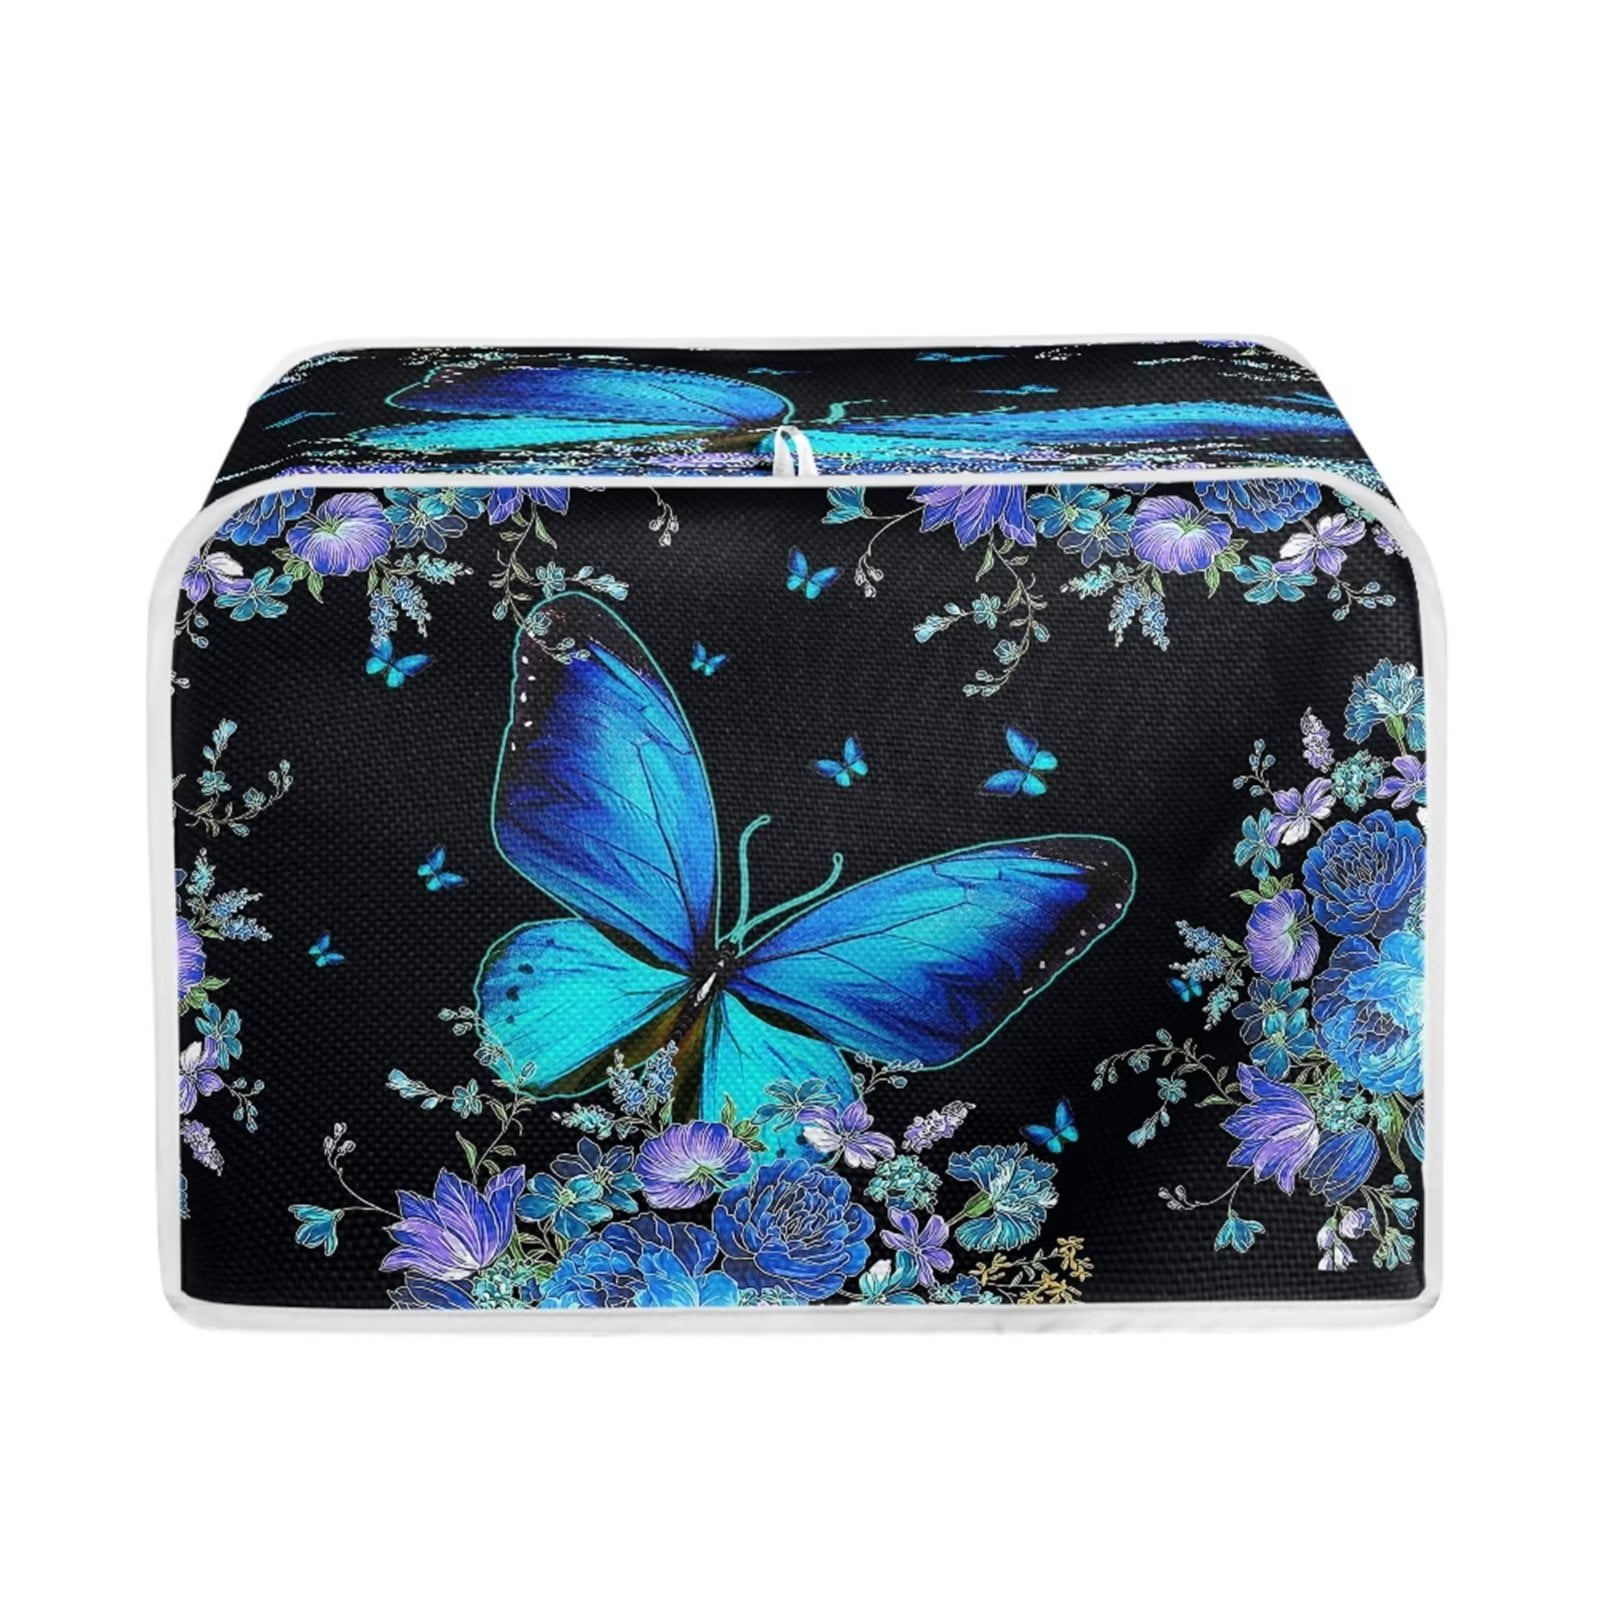 FKELYI Floral Butterfly Toaster Covers Waterproof Toaster Cover 2 Slice ...